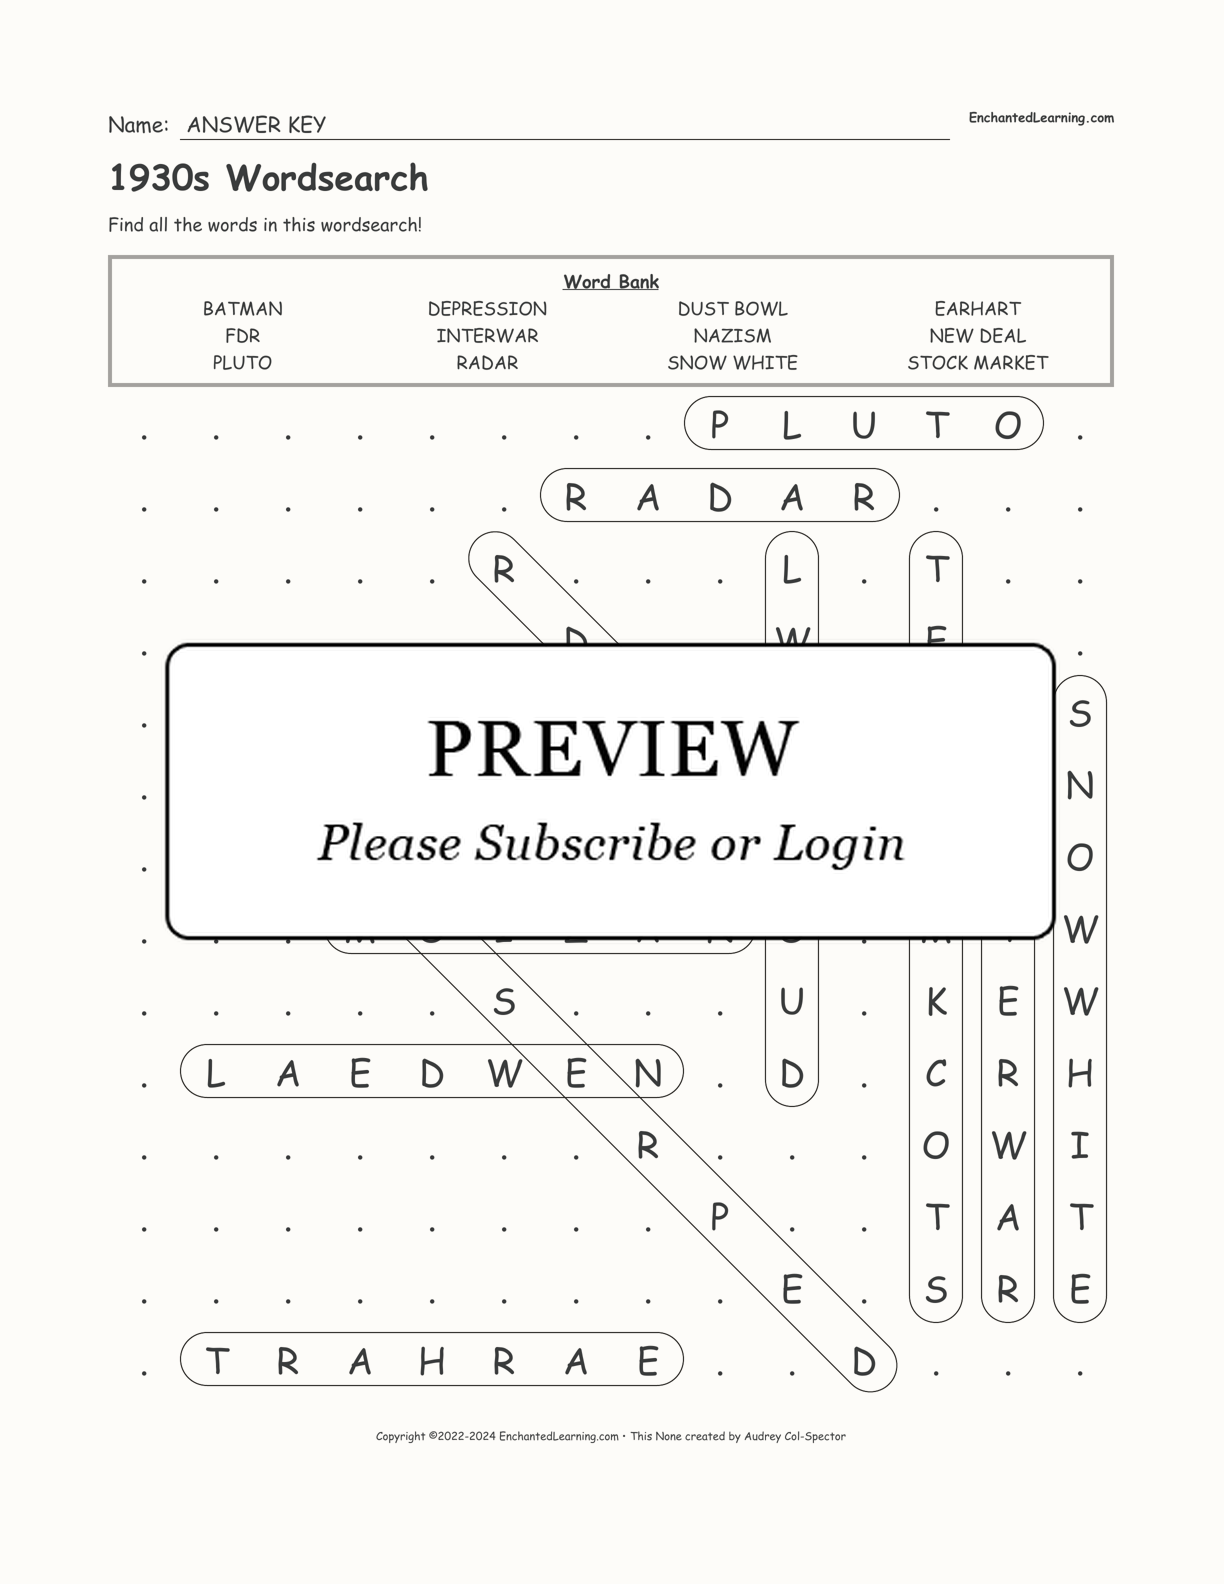 1930s Wordsearch interactive worksheet page 2